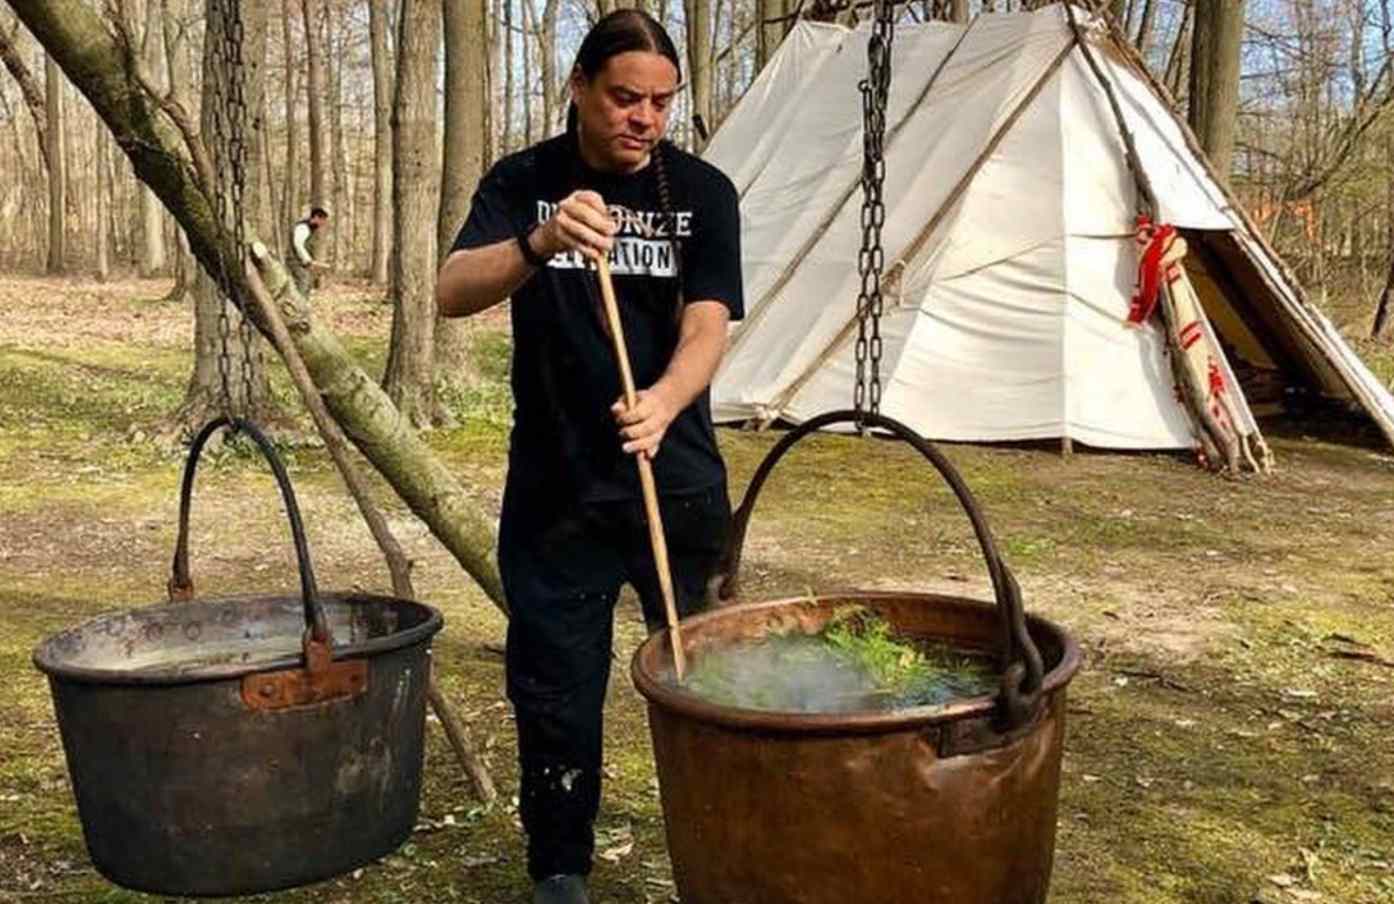 In a forest, a large pot is suspended by a chain over a wood fire while a man stirs it with a wooden spoon. In the background is a large traditional Native tent.